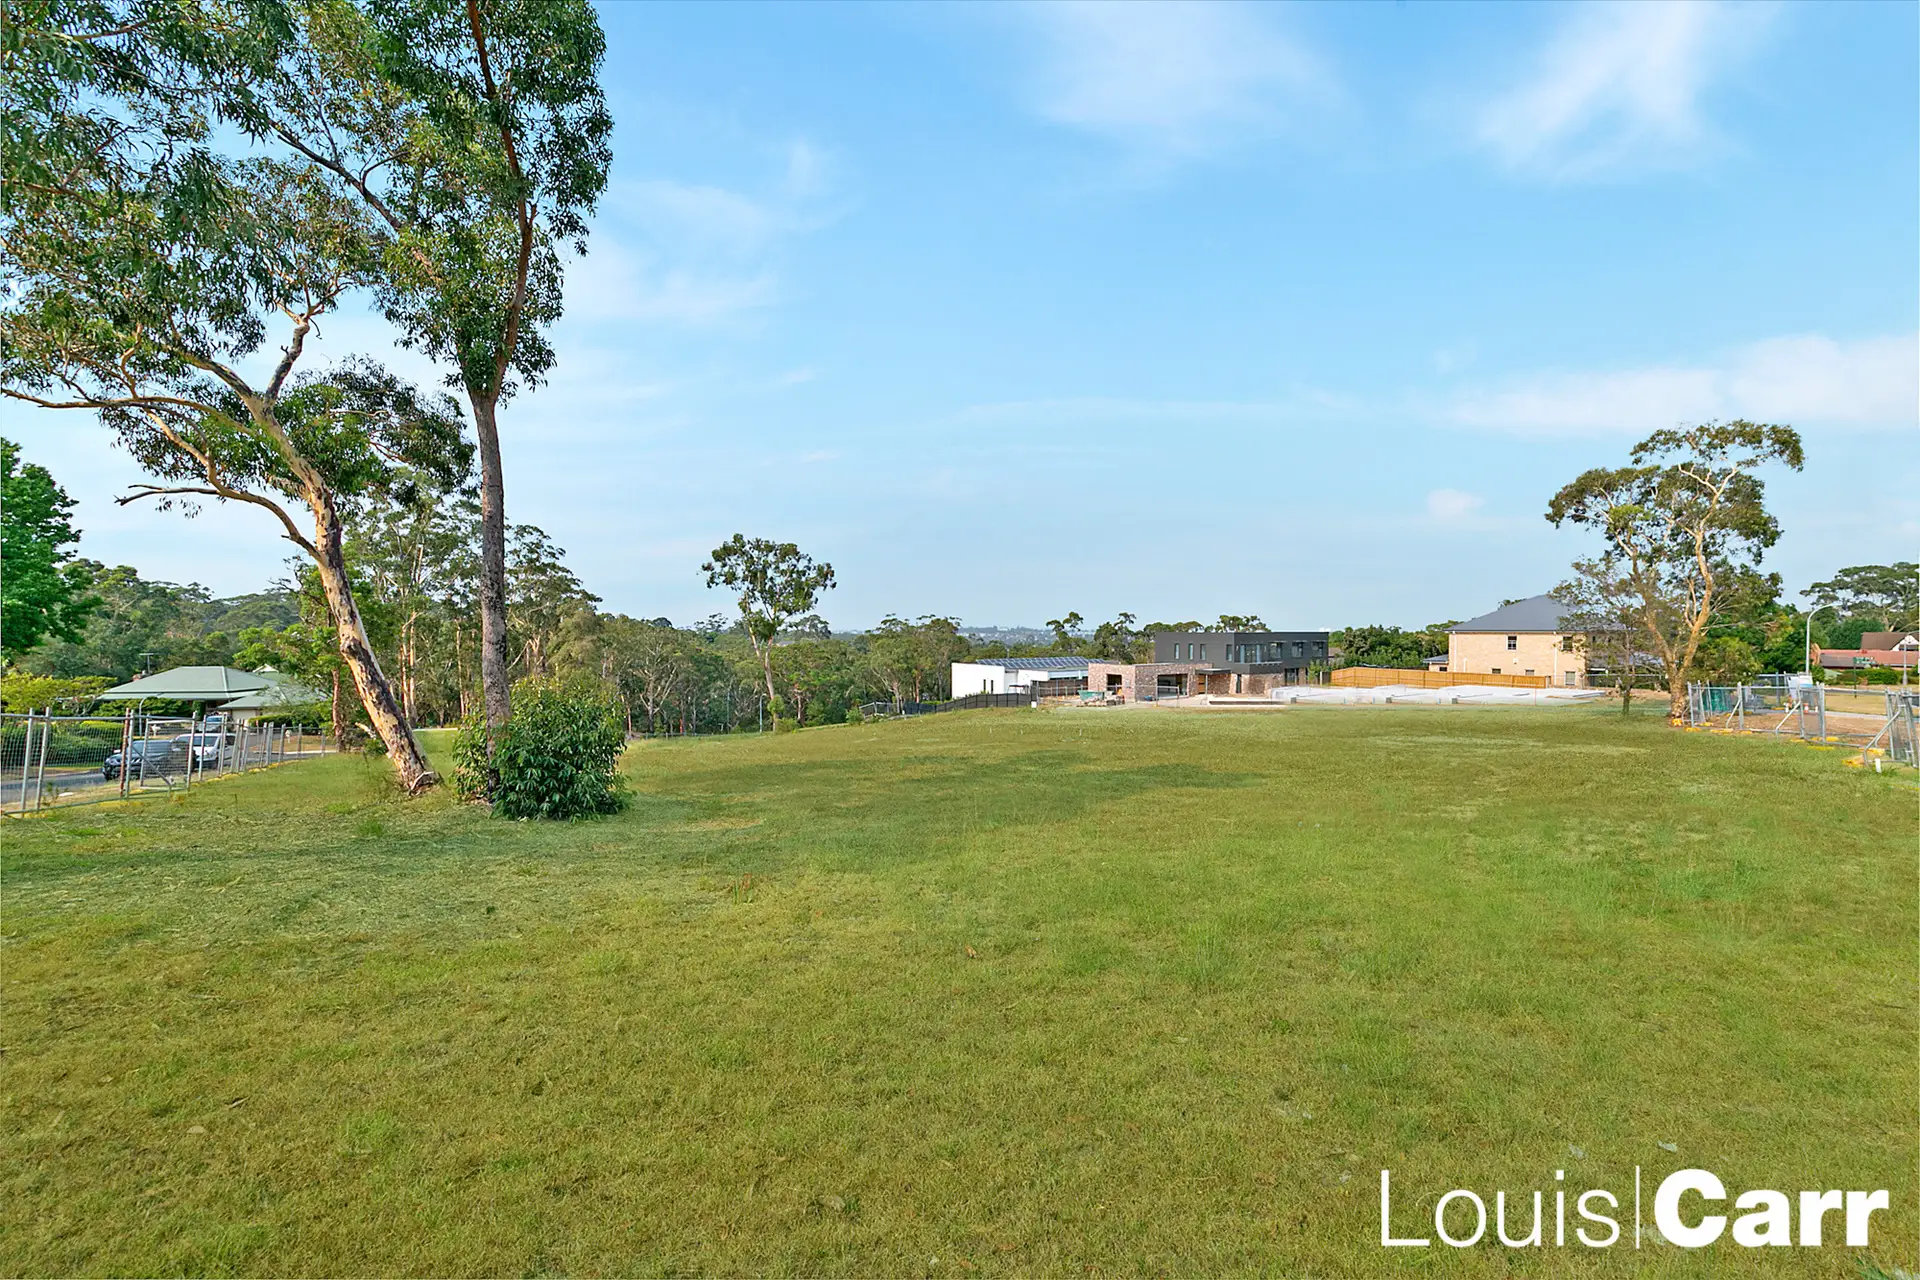 Photo #3: 56 Evans Road, Glenhaven - For Sale by Louis Carr Real Estate